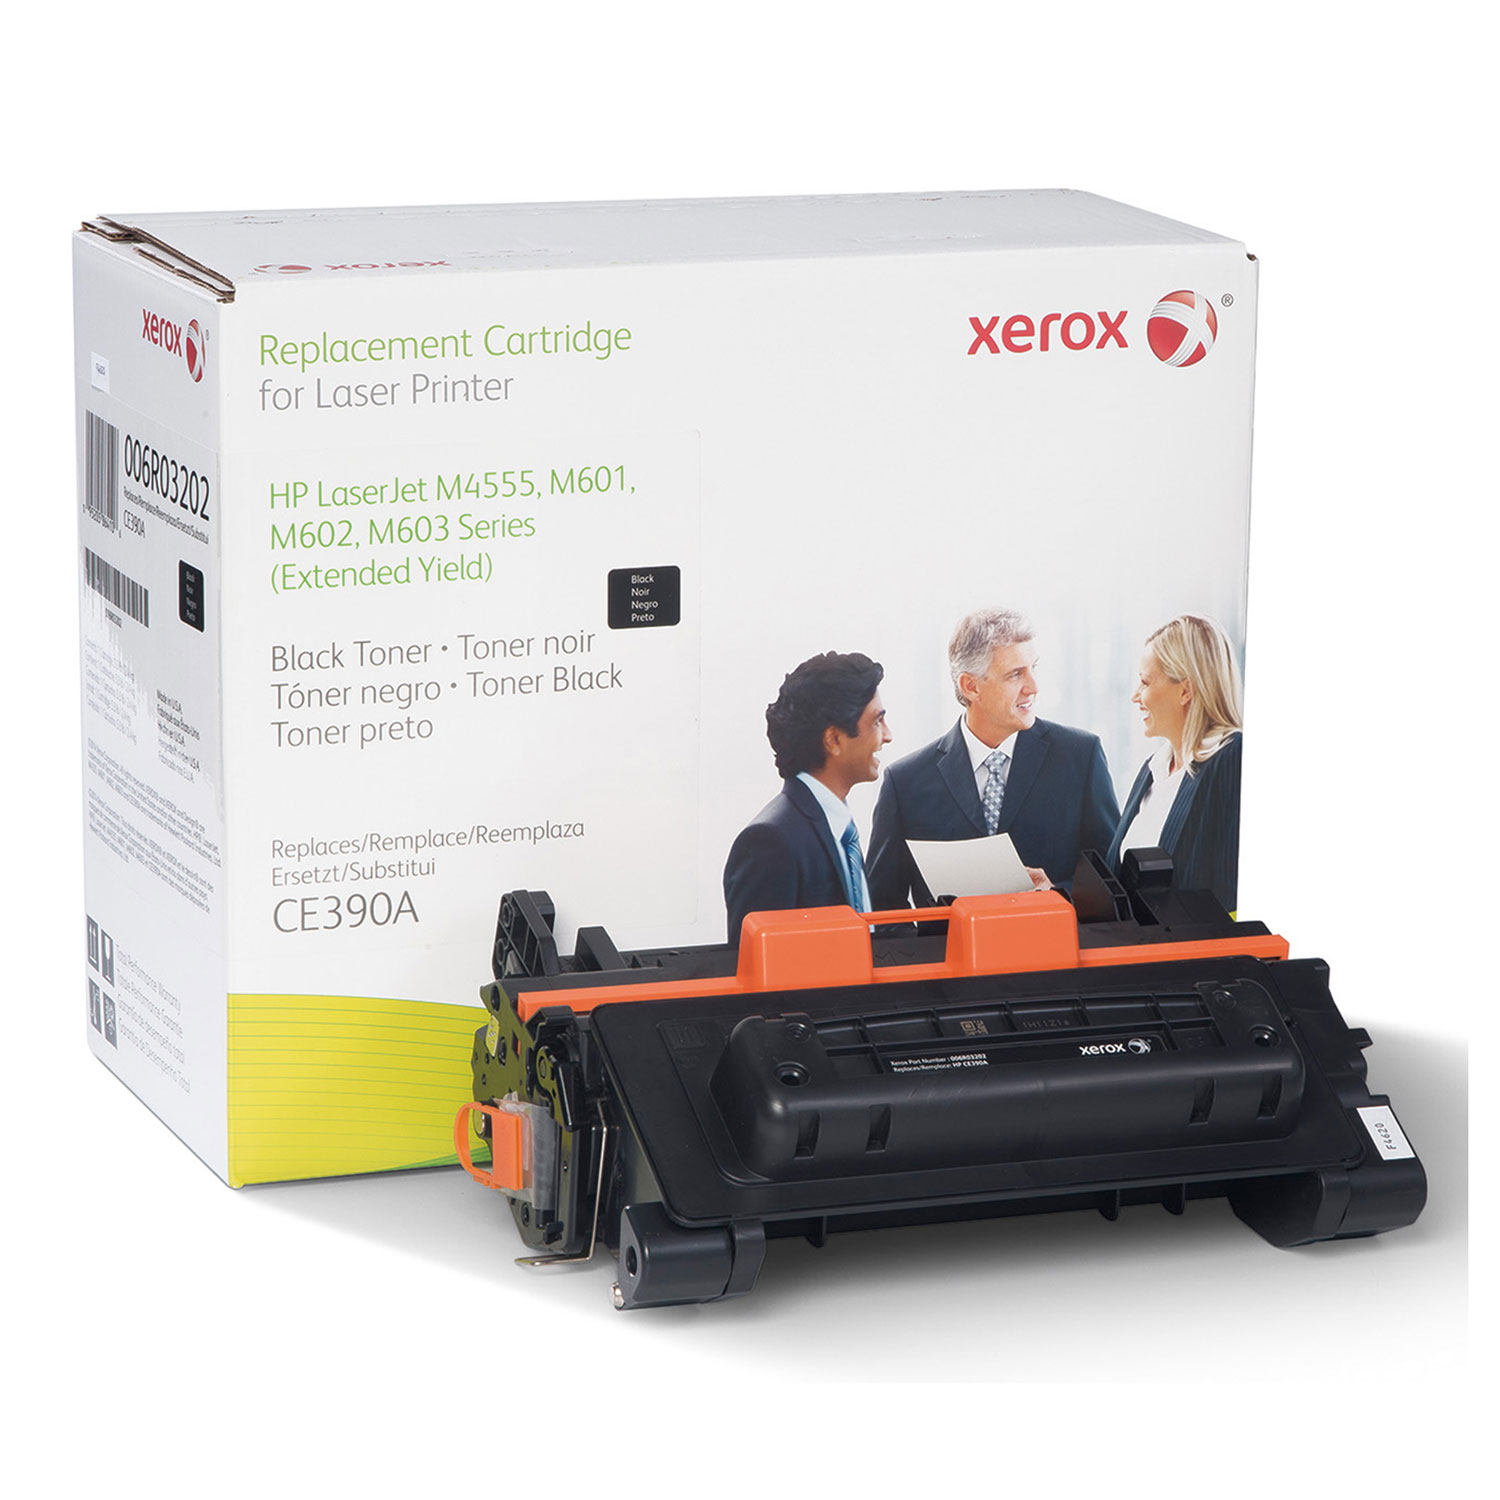  Xerox 006R03202 006R03202 Remanufactured CE390A (90A) Extended-Yield Toner, Black (XER006R03202) 